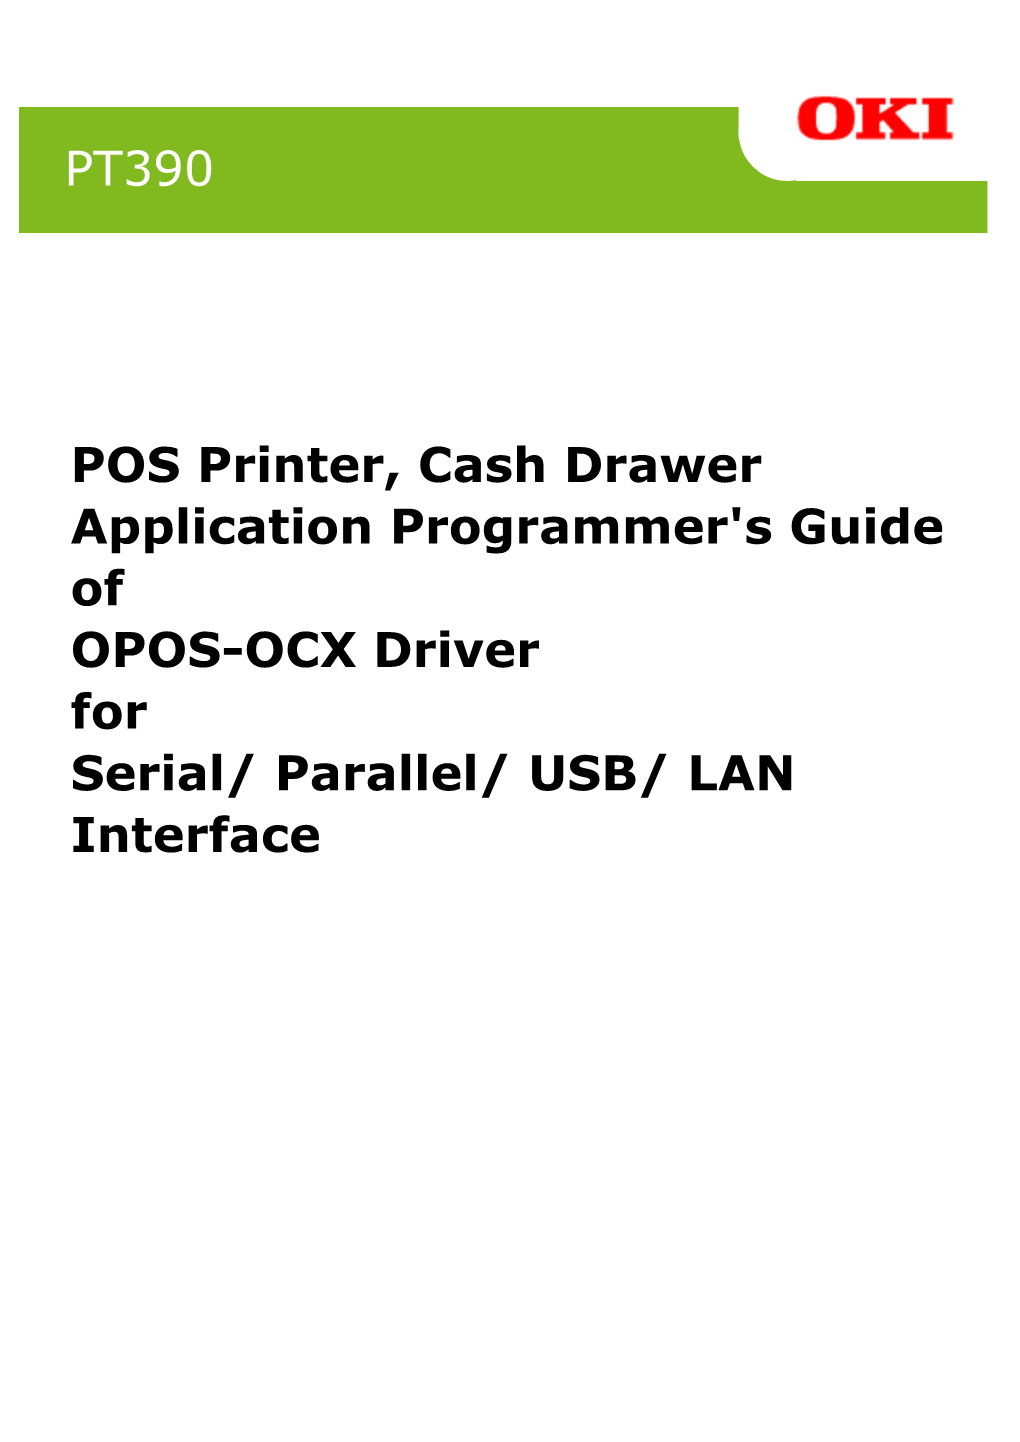 POS Printer, Cash Drawer Application Programmer's Guide of OPOS-OCX Driver for Serial/ Parallel/ USB/ LAN Interface